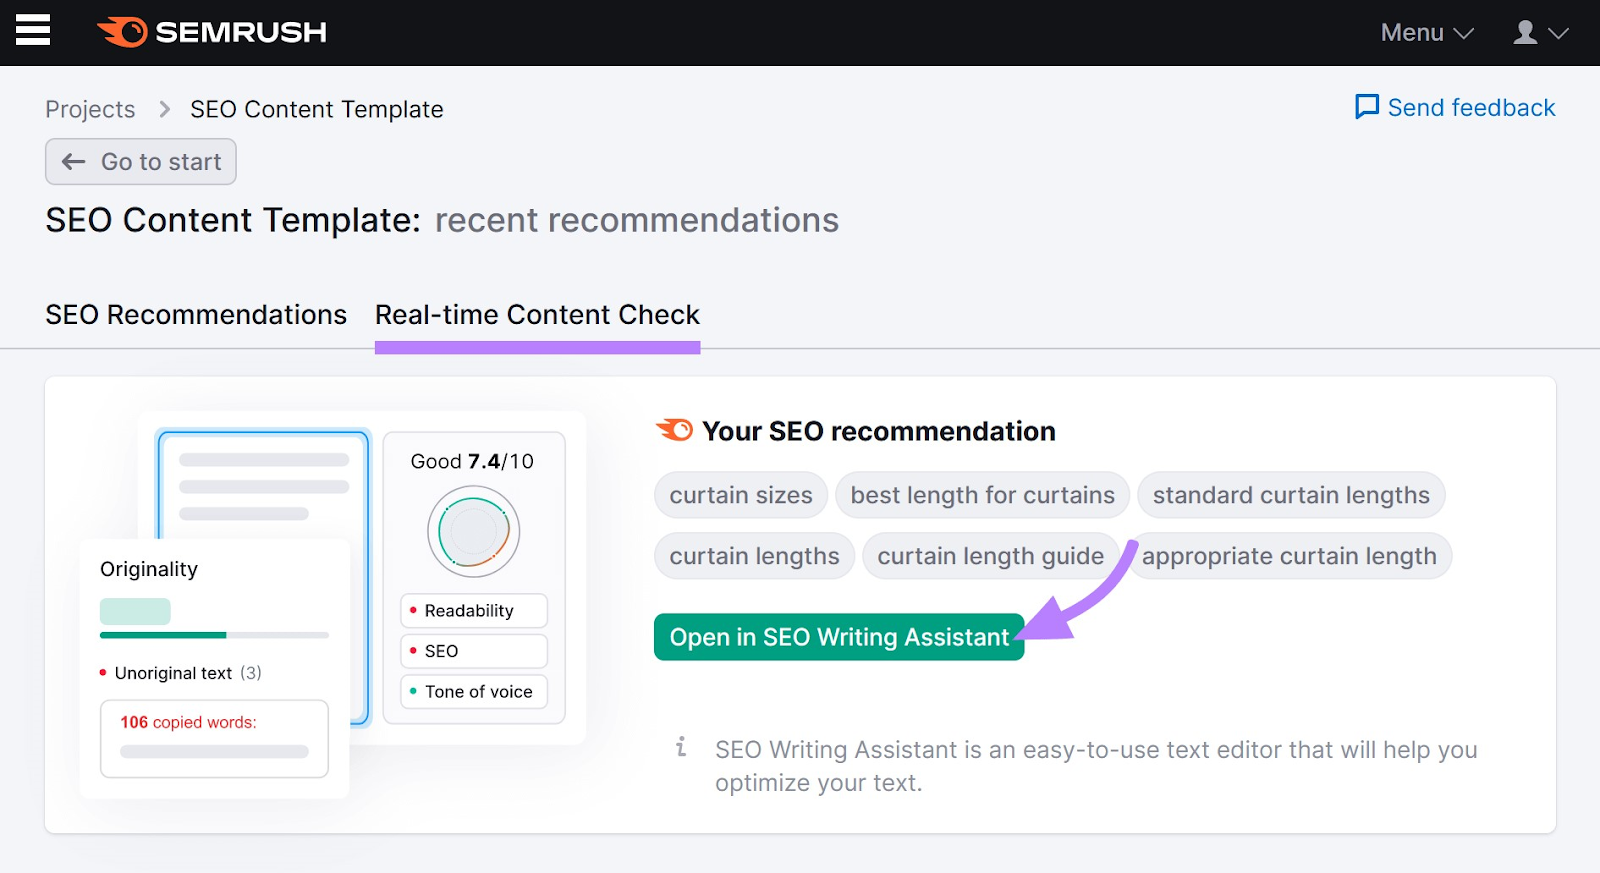 “Real-time Content Check” and “Open in SEO Writing Assistant” highlighted